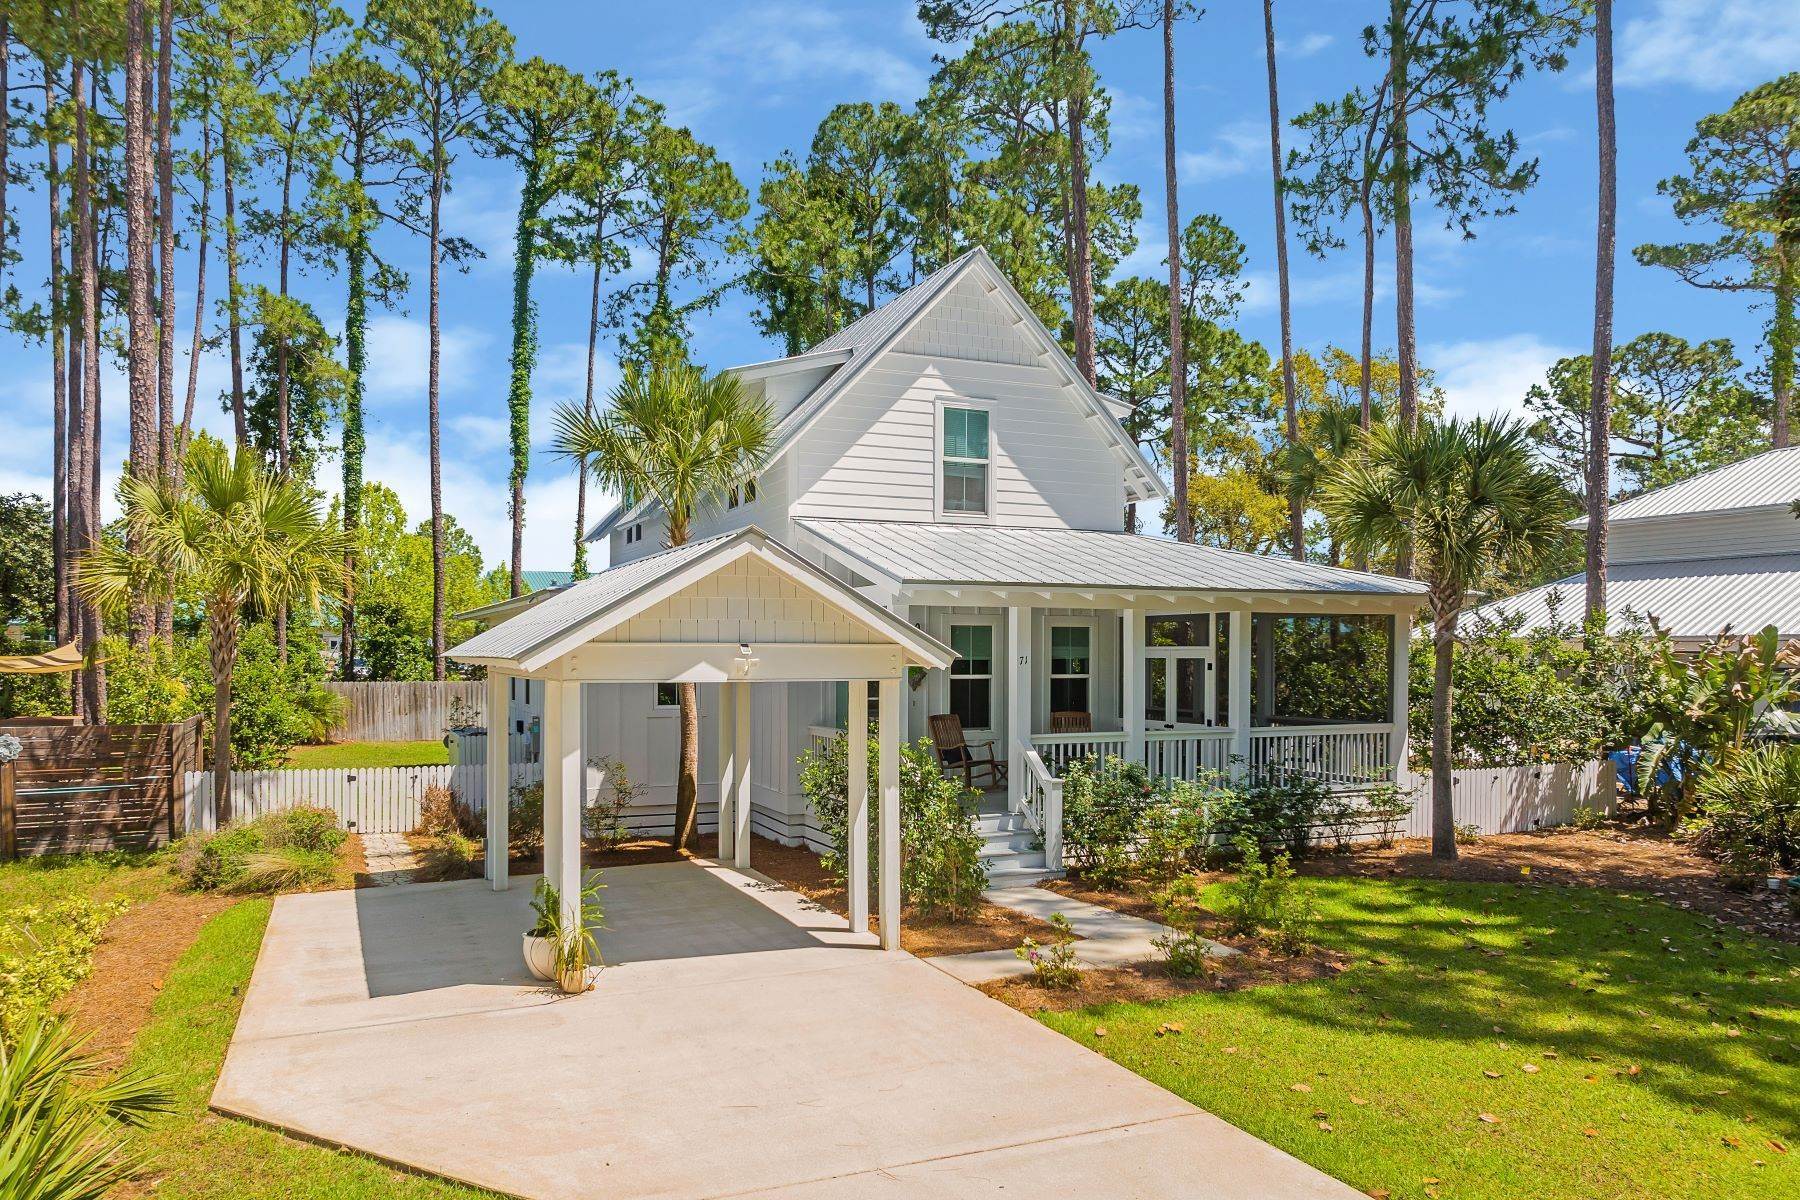 Property for Sale at Quintessential Luxury Cottage On West End Of 30A 71 Sunrise Circle Santa Rosa Beach, Florida 32459 United States